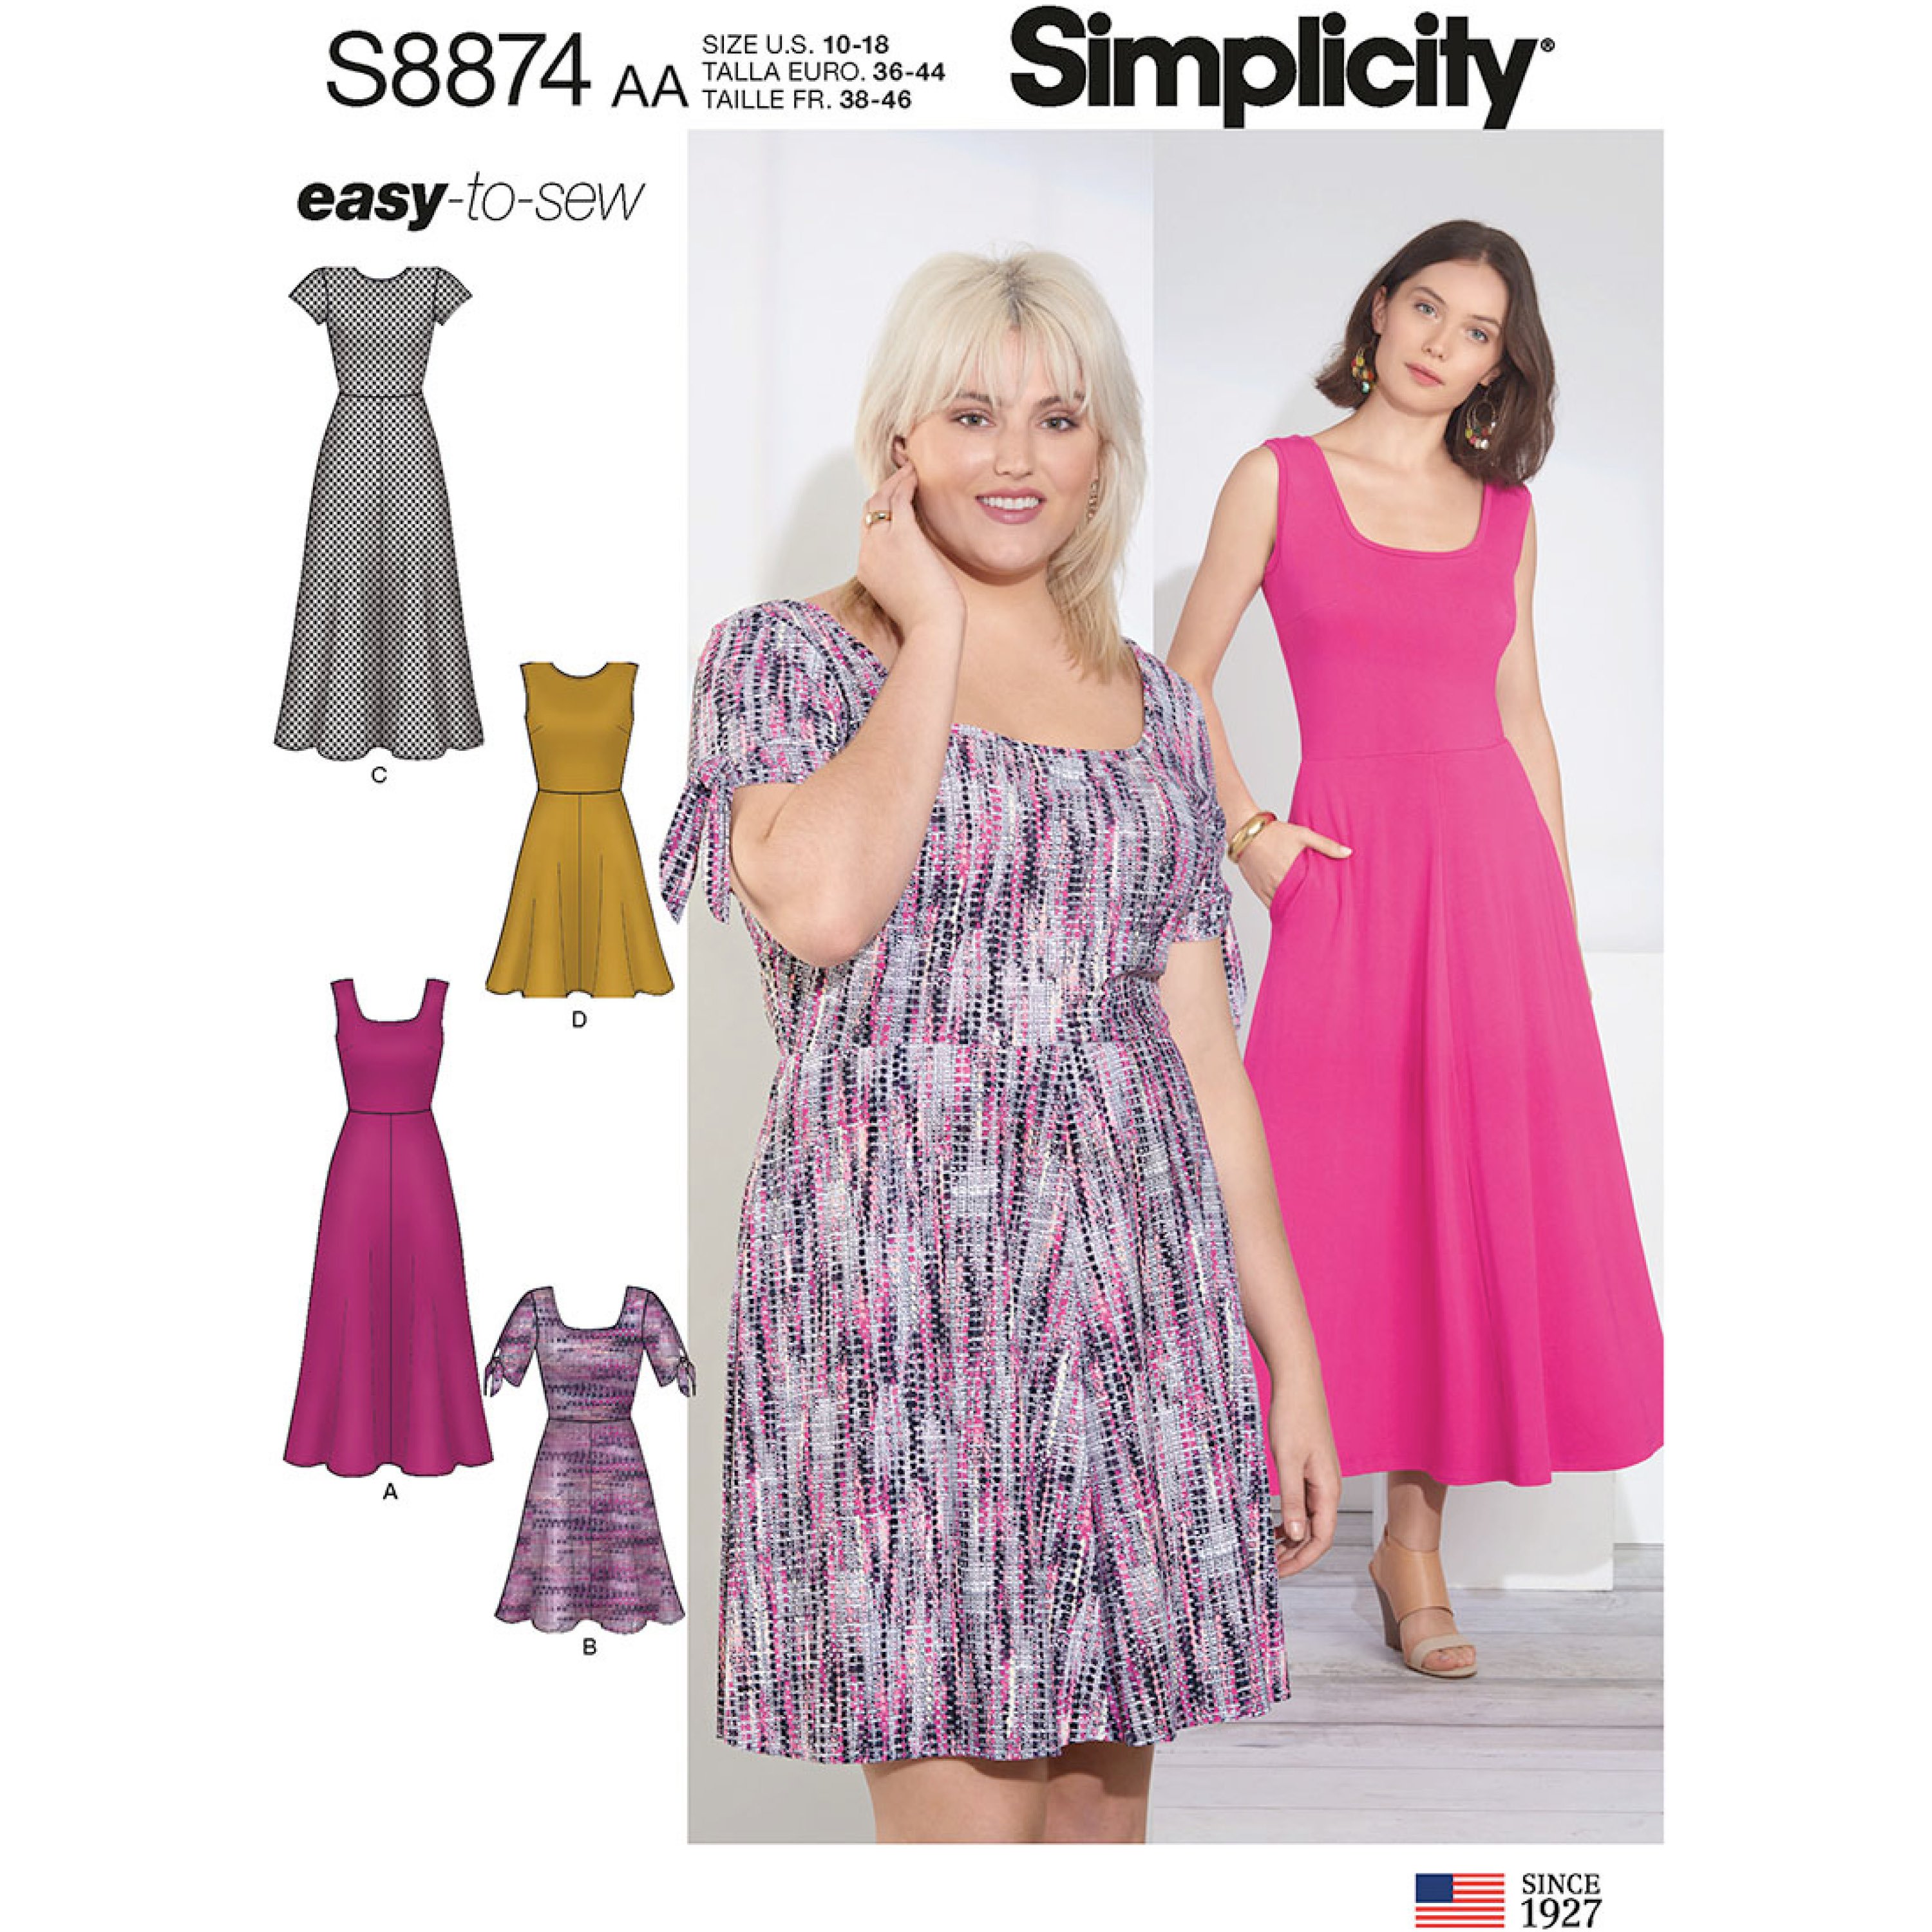 Simplicity 8874 Misses'/Women's Easy-to-Sew Knit Dress